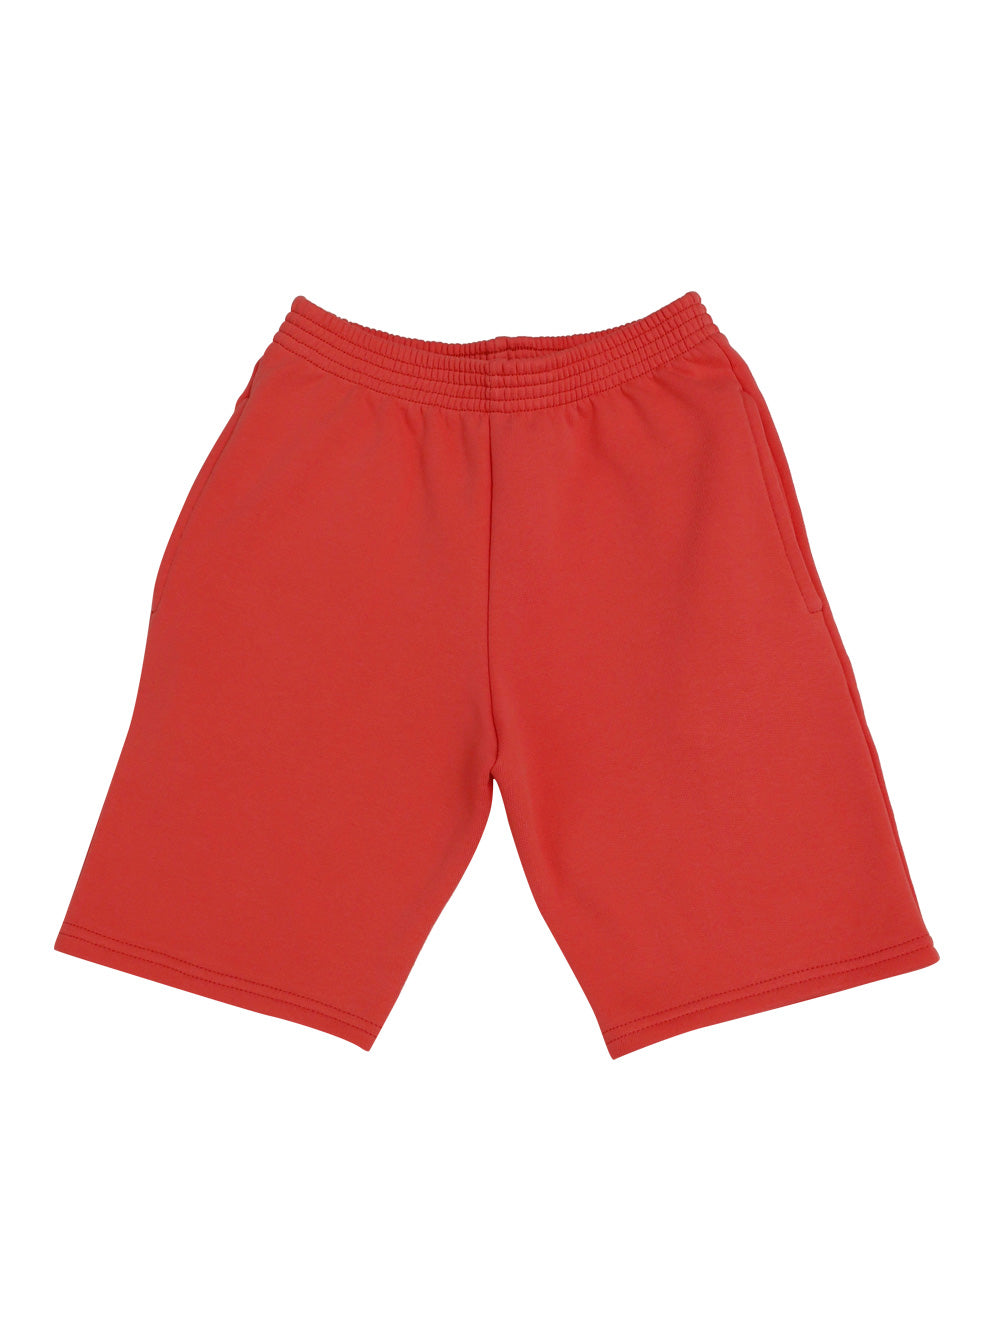 Coco Taxi Coral Pants